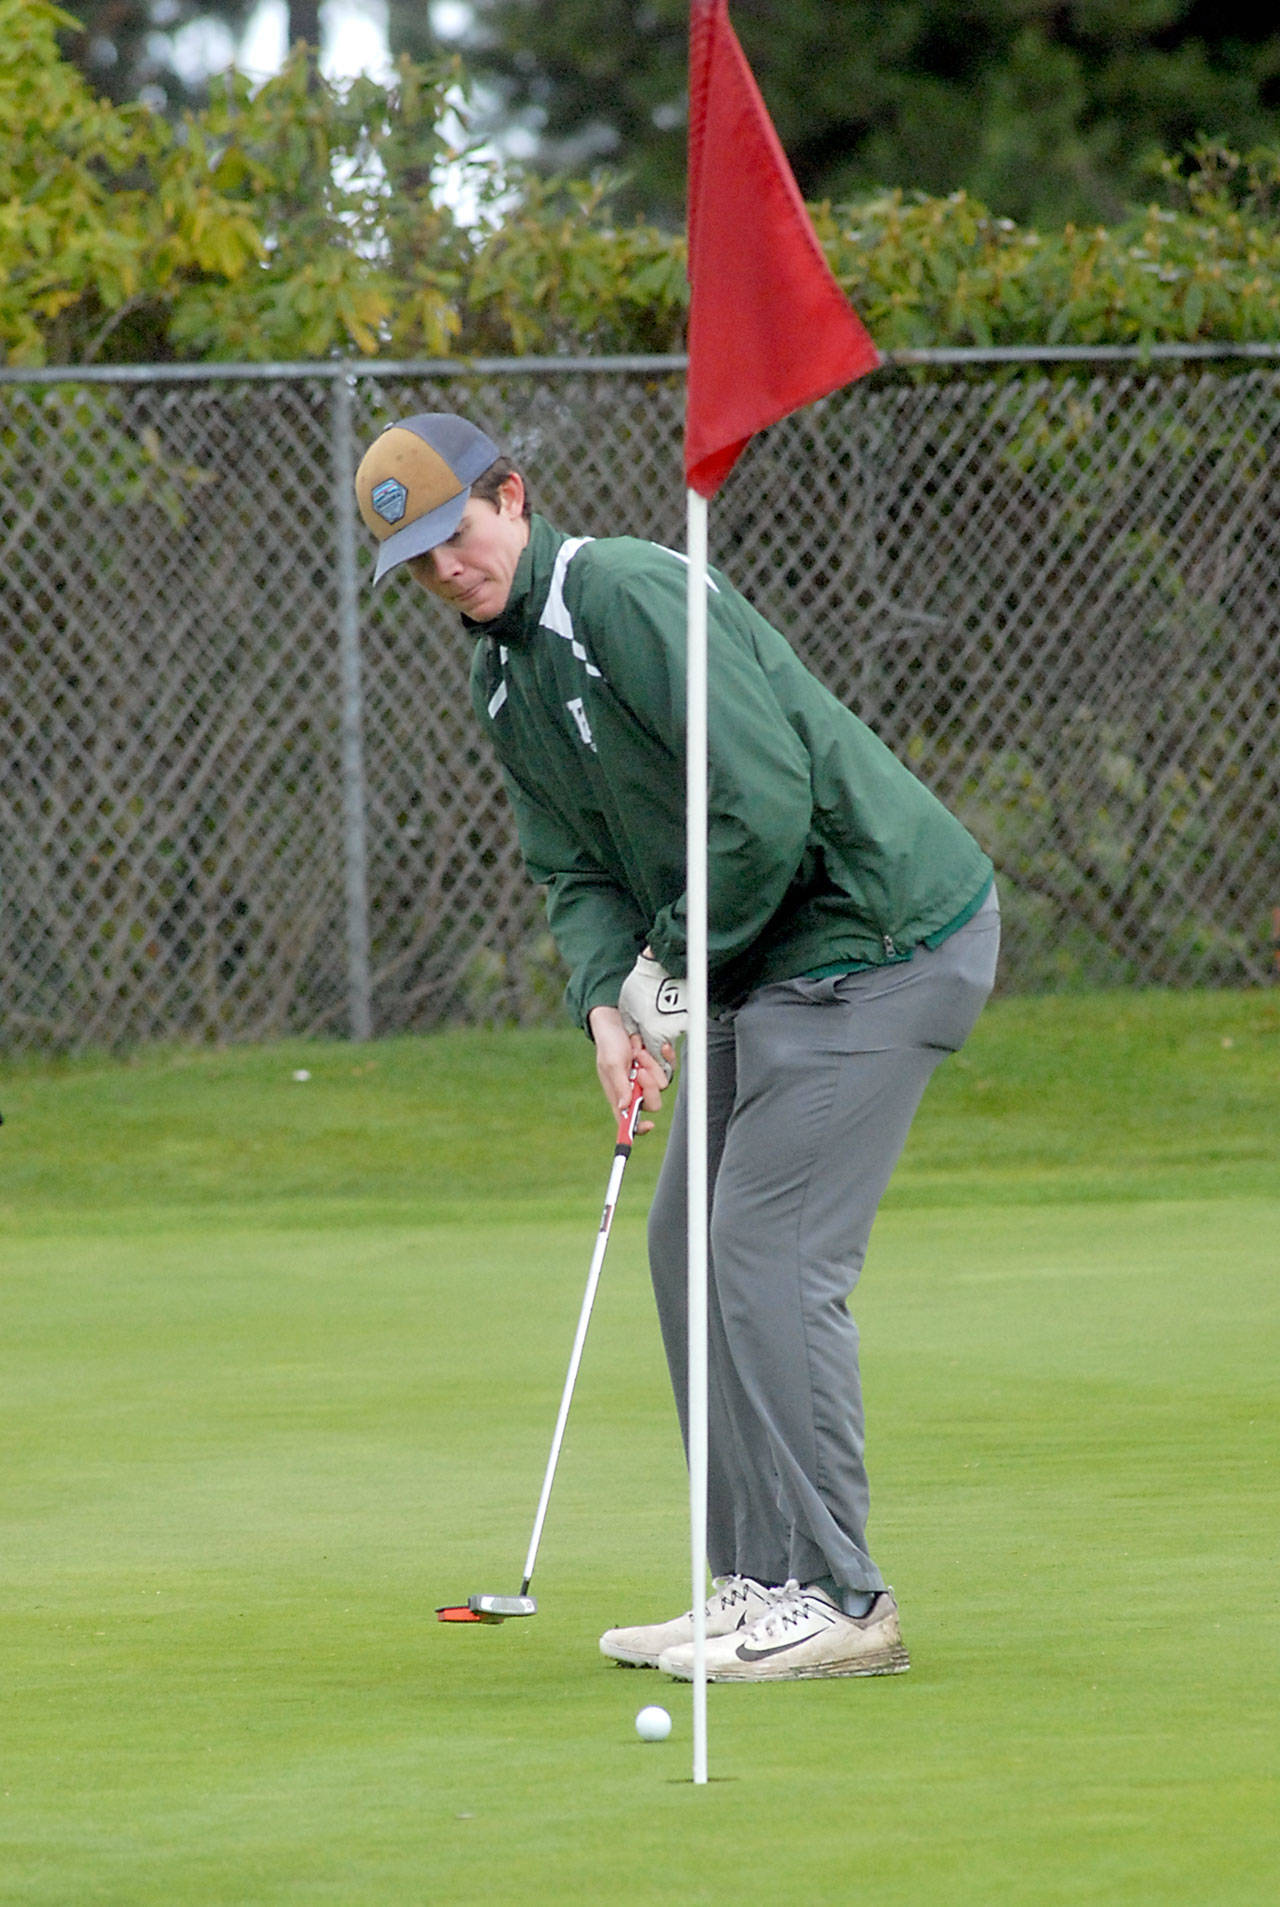 Keith Thorpe/Peninsula Daily News Port Angeles’ Skyler Cobb putts on the second hole at Peninsula Golf Club on Wednesday in Port Angeles.